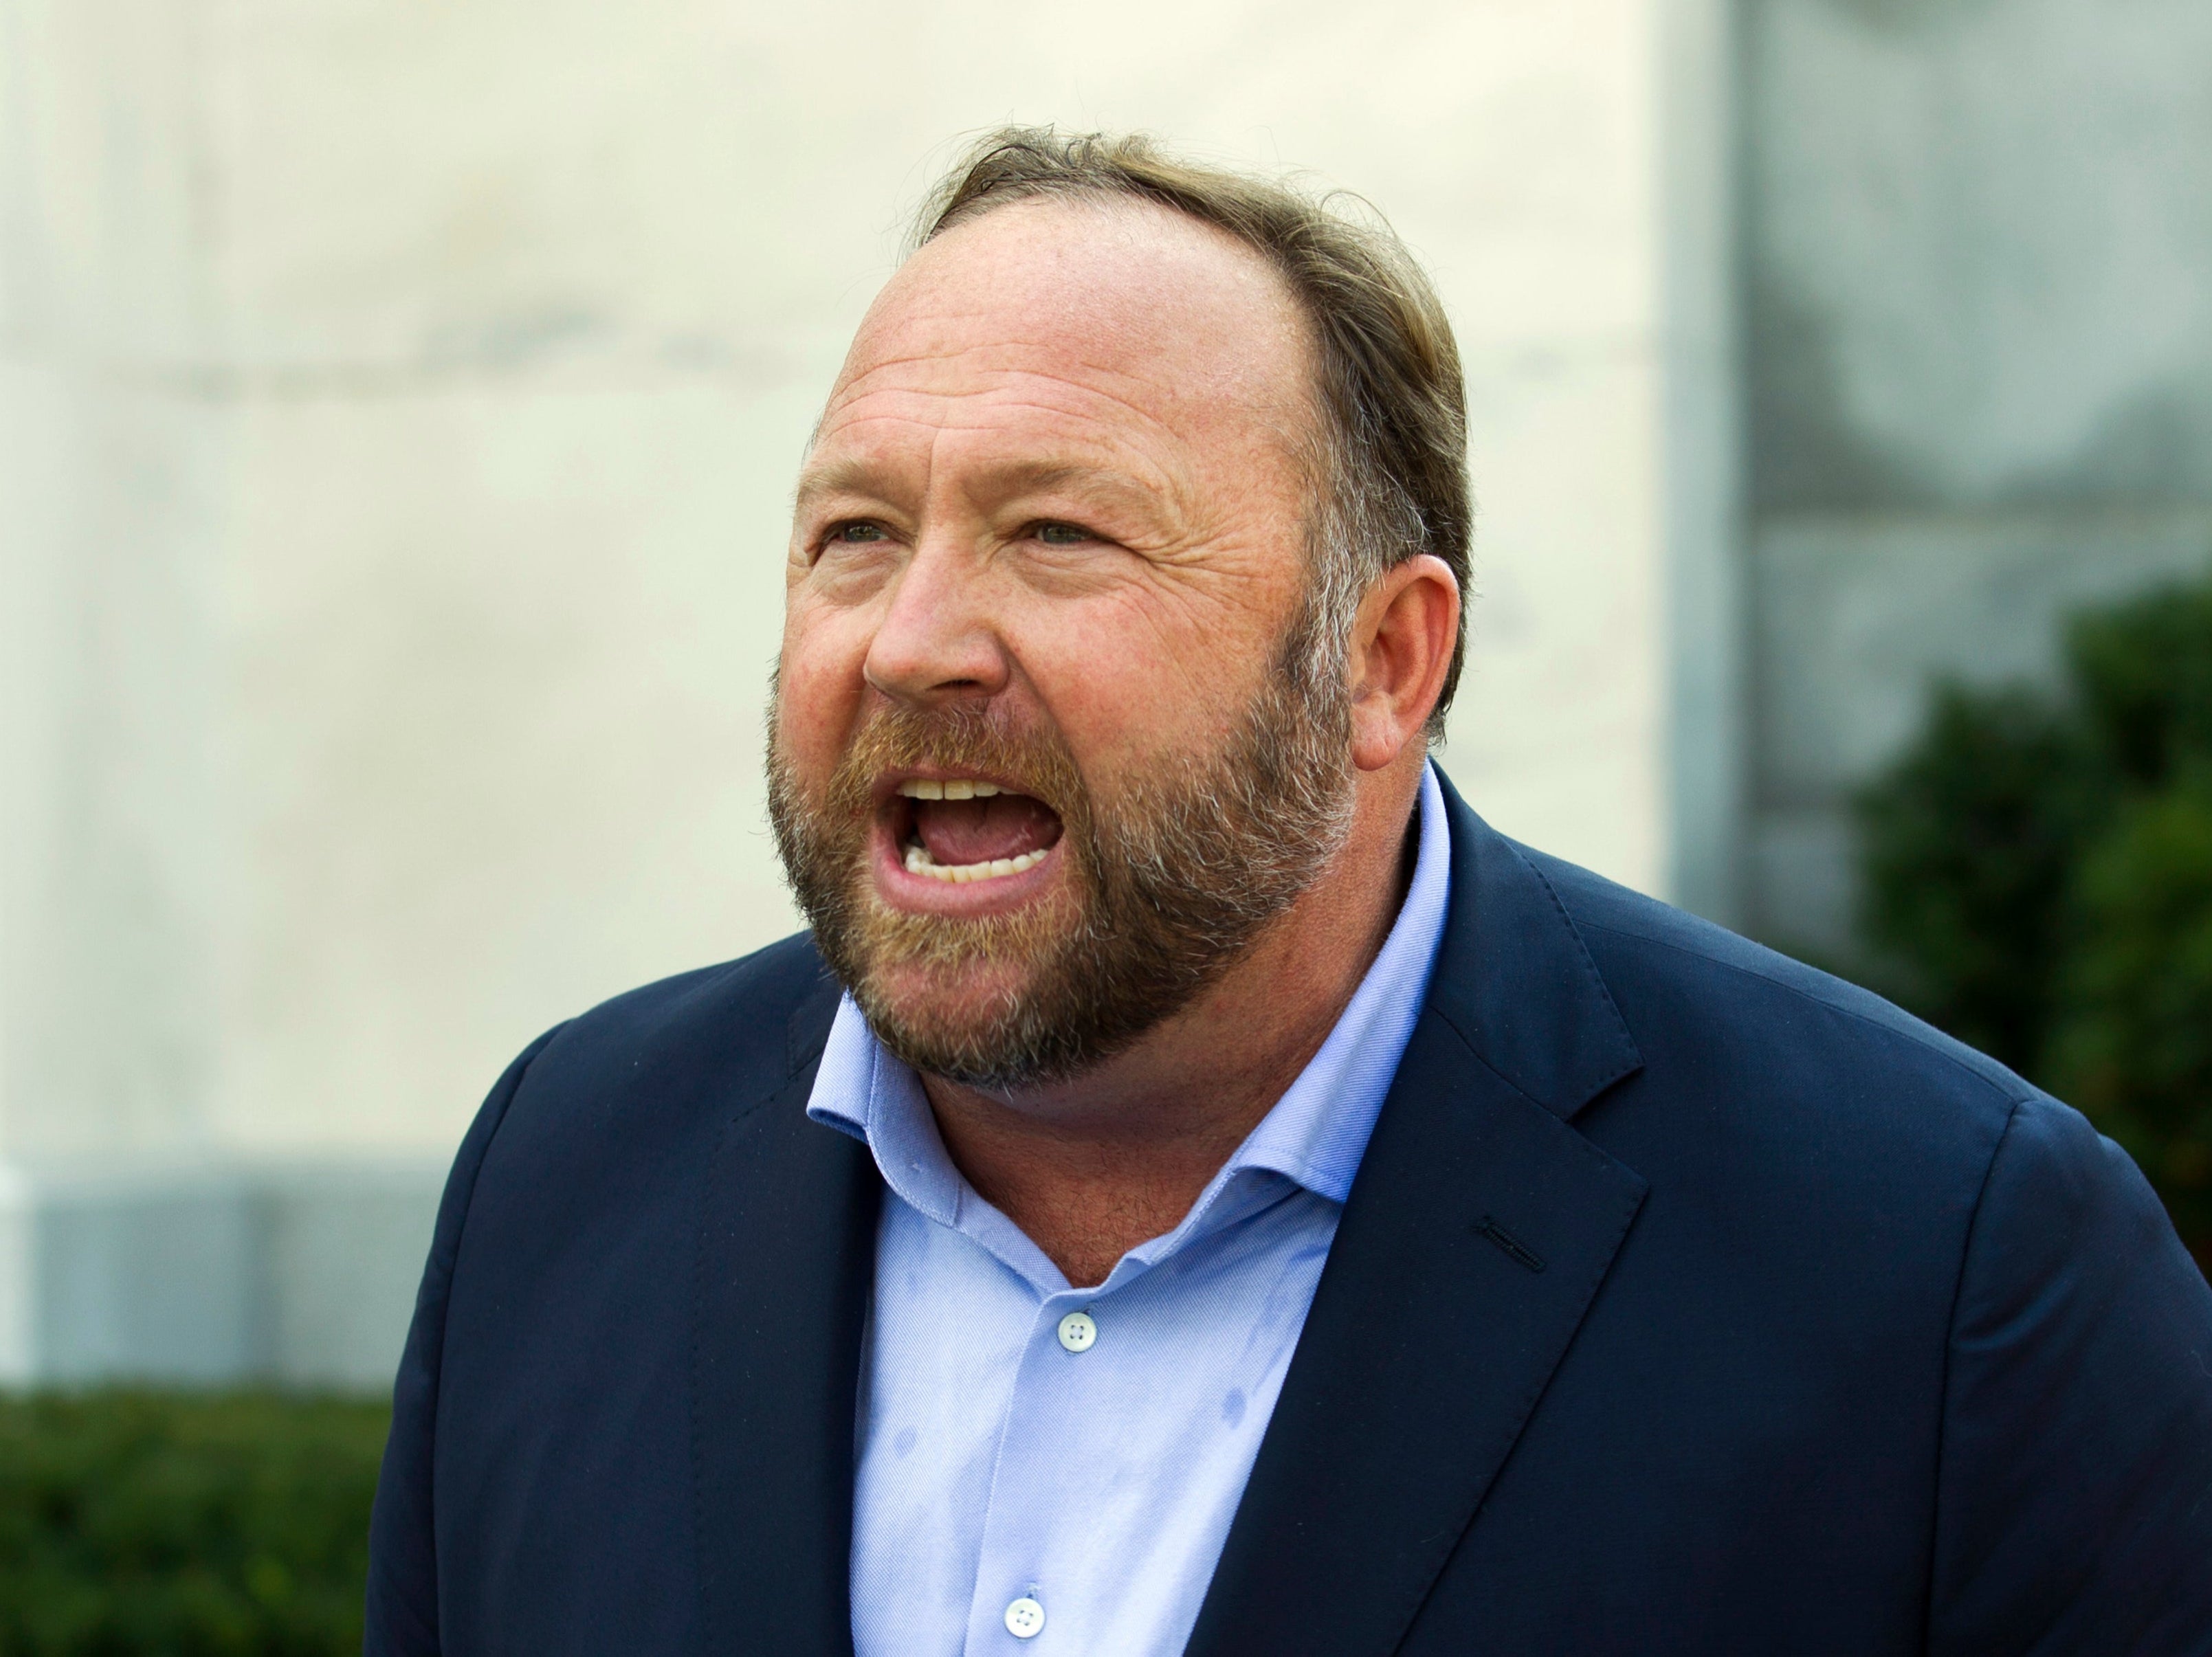 Alex Jones is being sued by the families of Sandy Hook victims